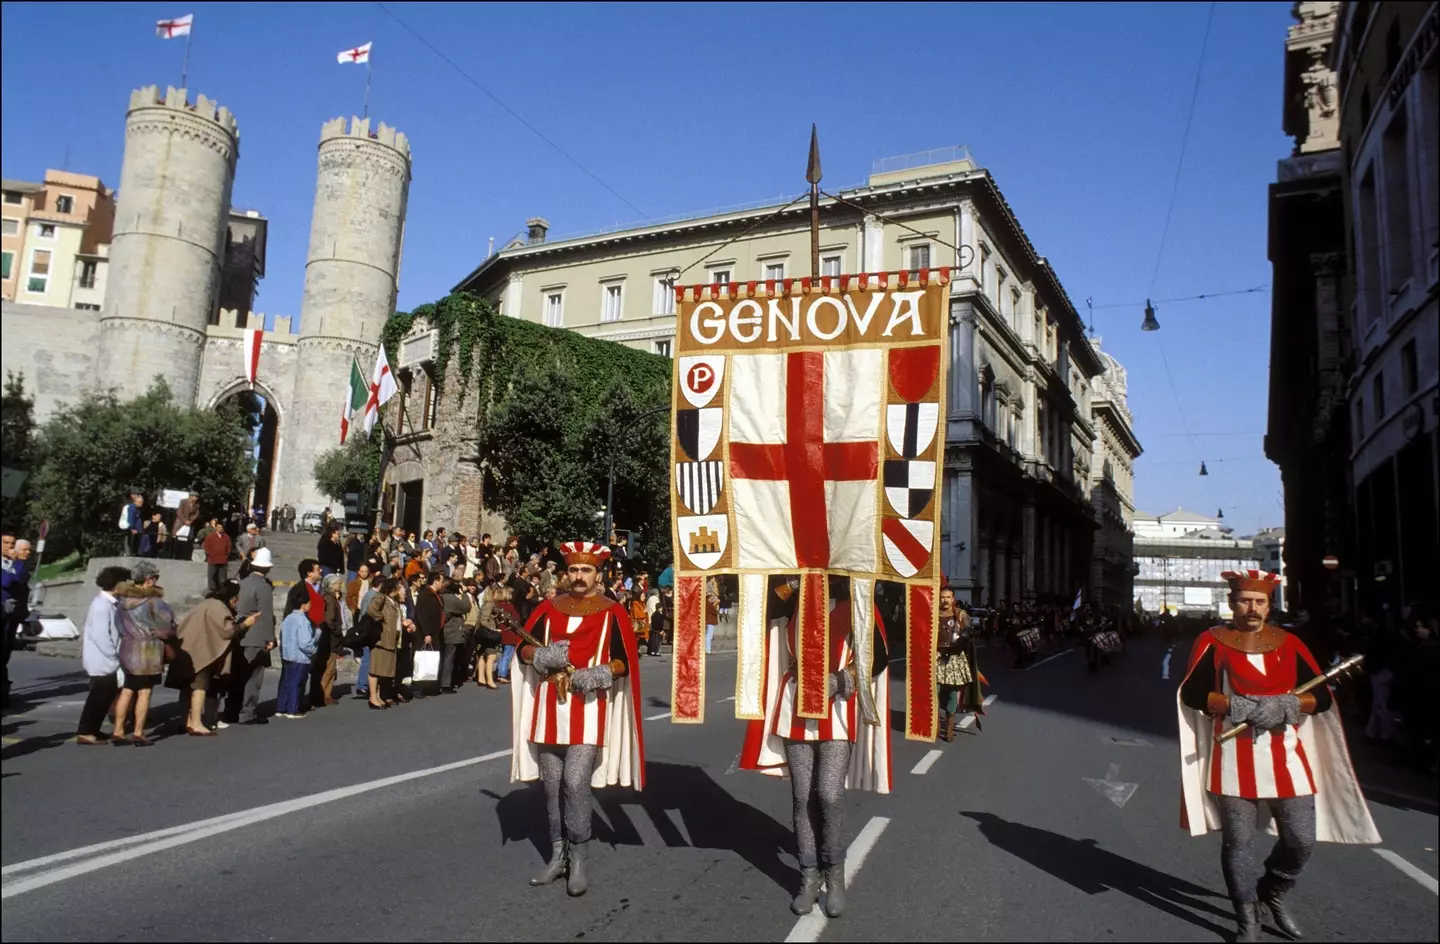 Genoa first adopted the flag and St George as its patron saint in 1190 during the Crusades (Getty)